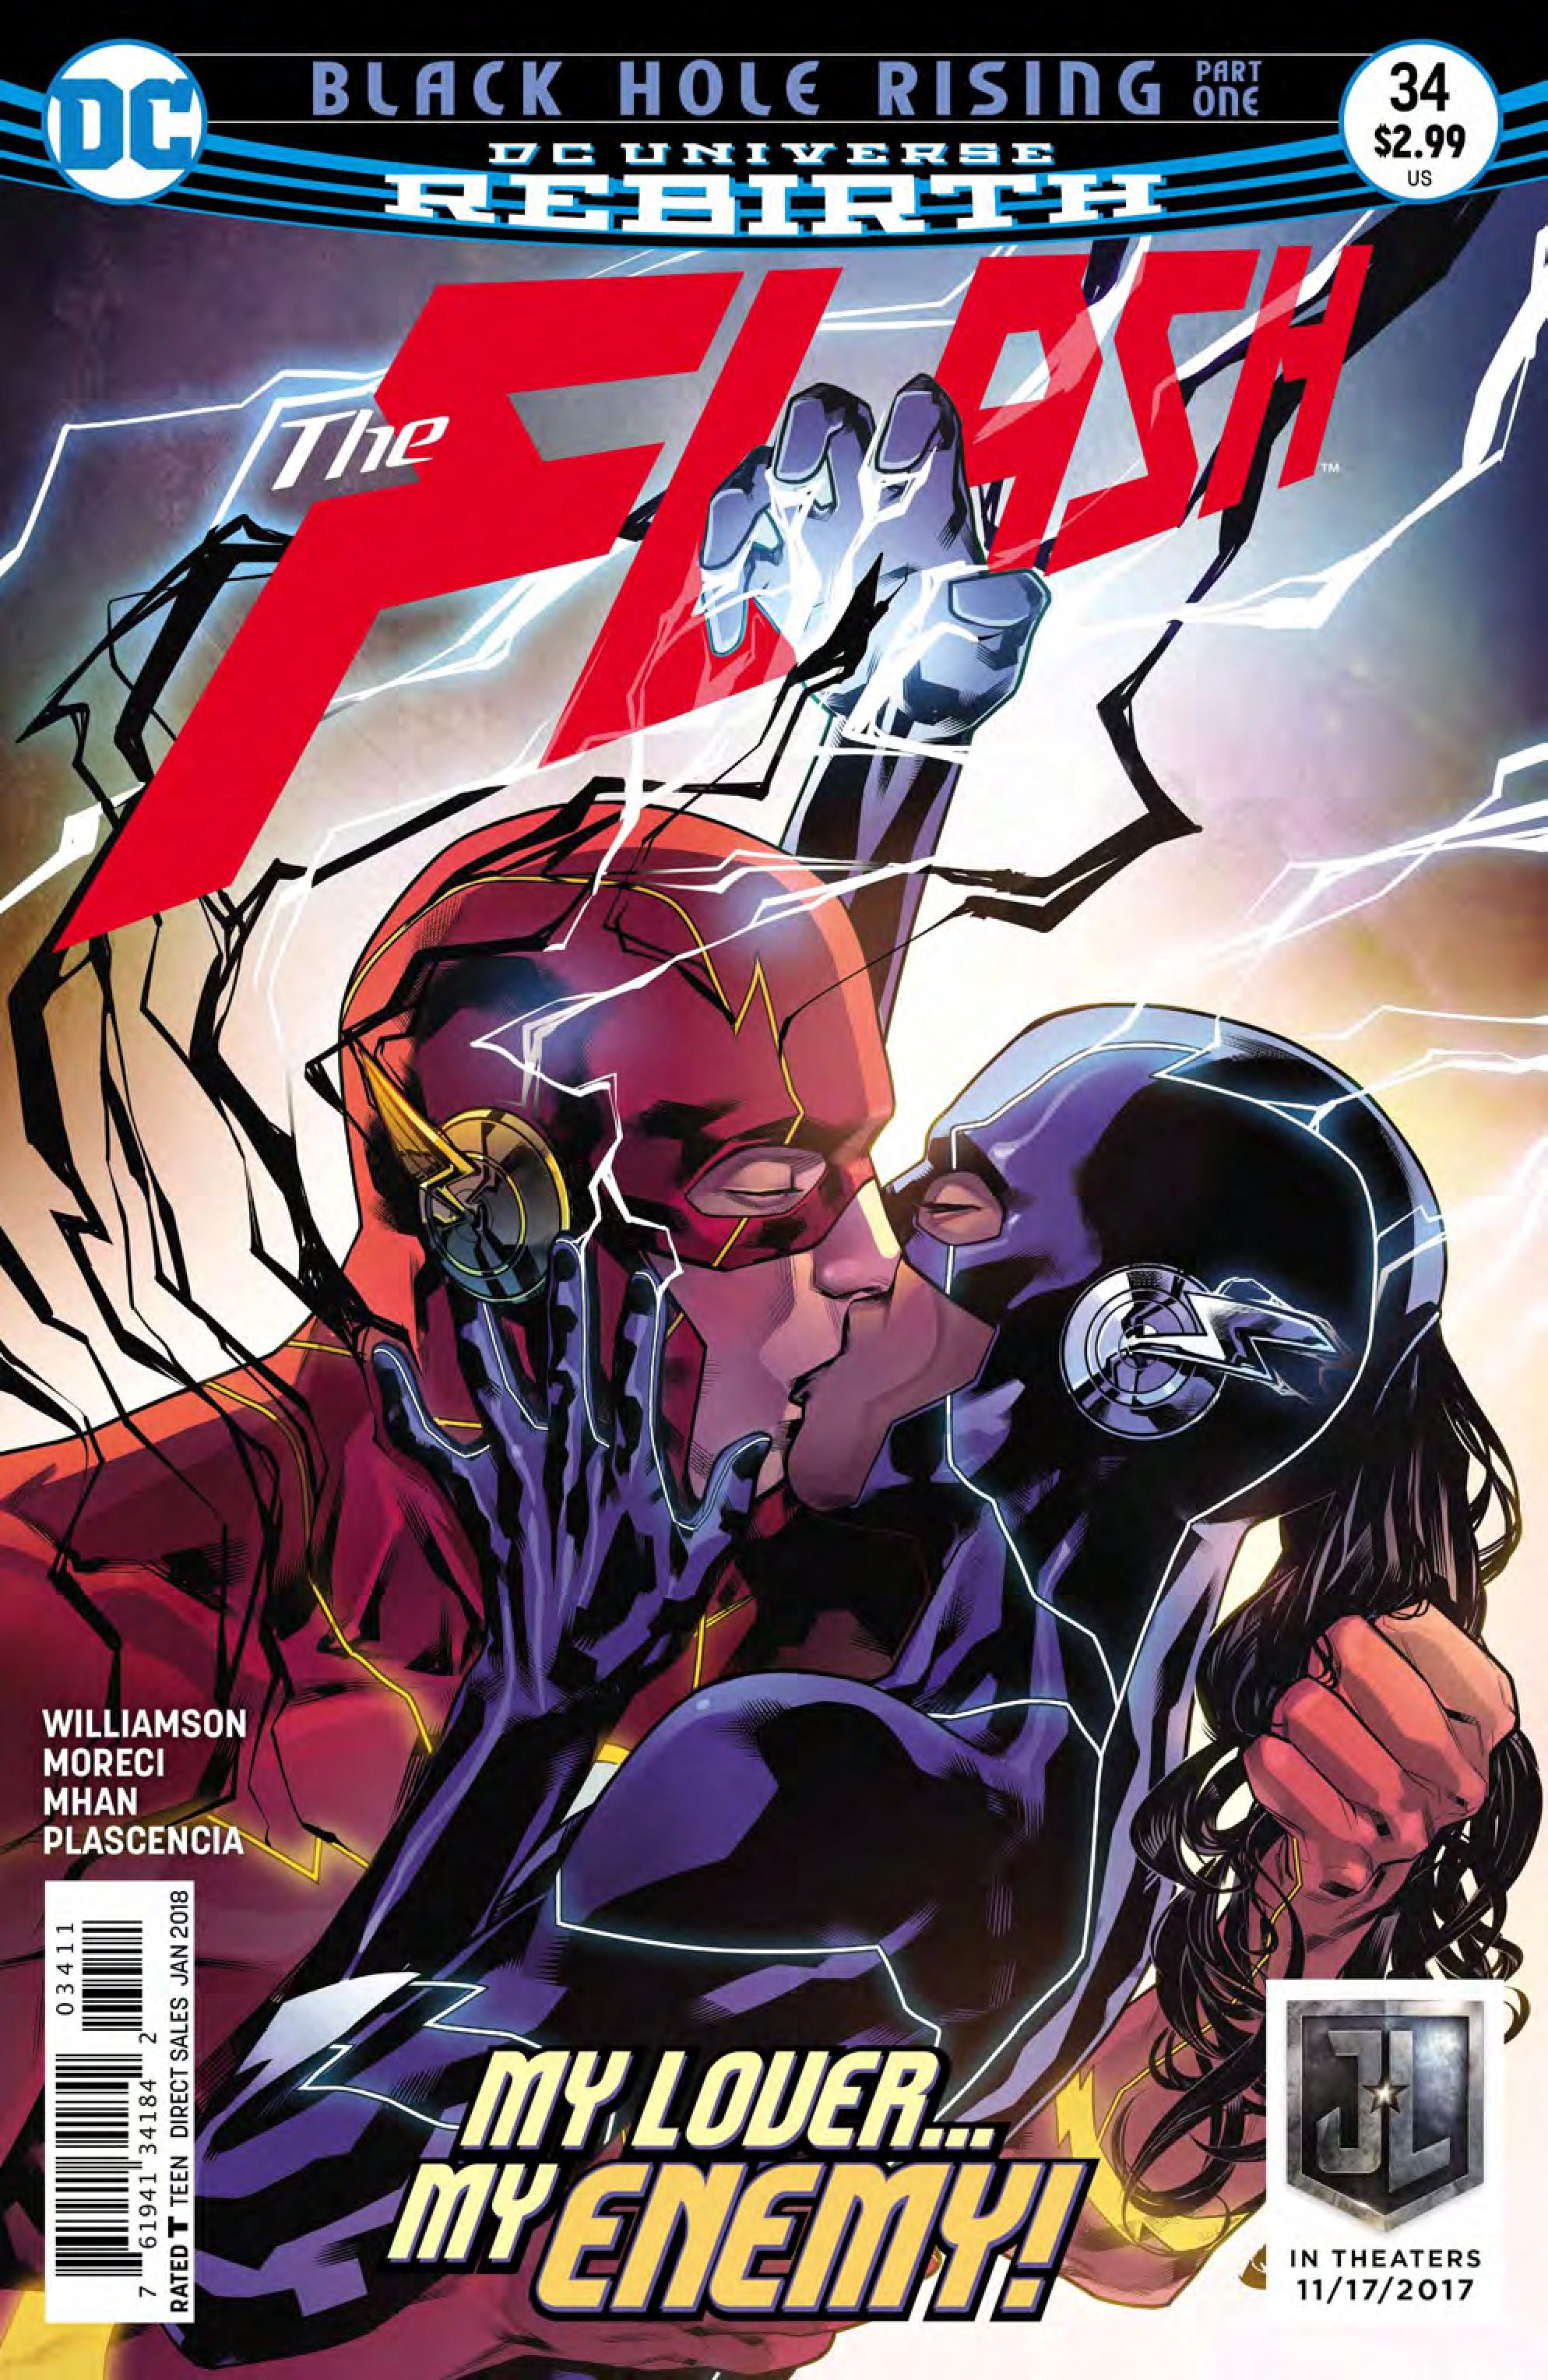 The Flash #34 Review